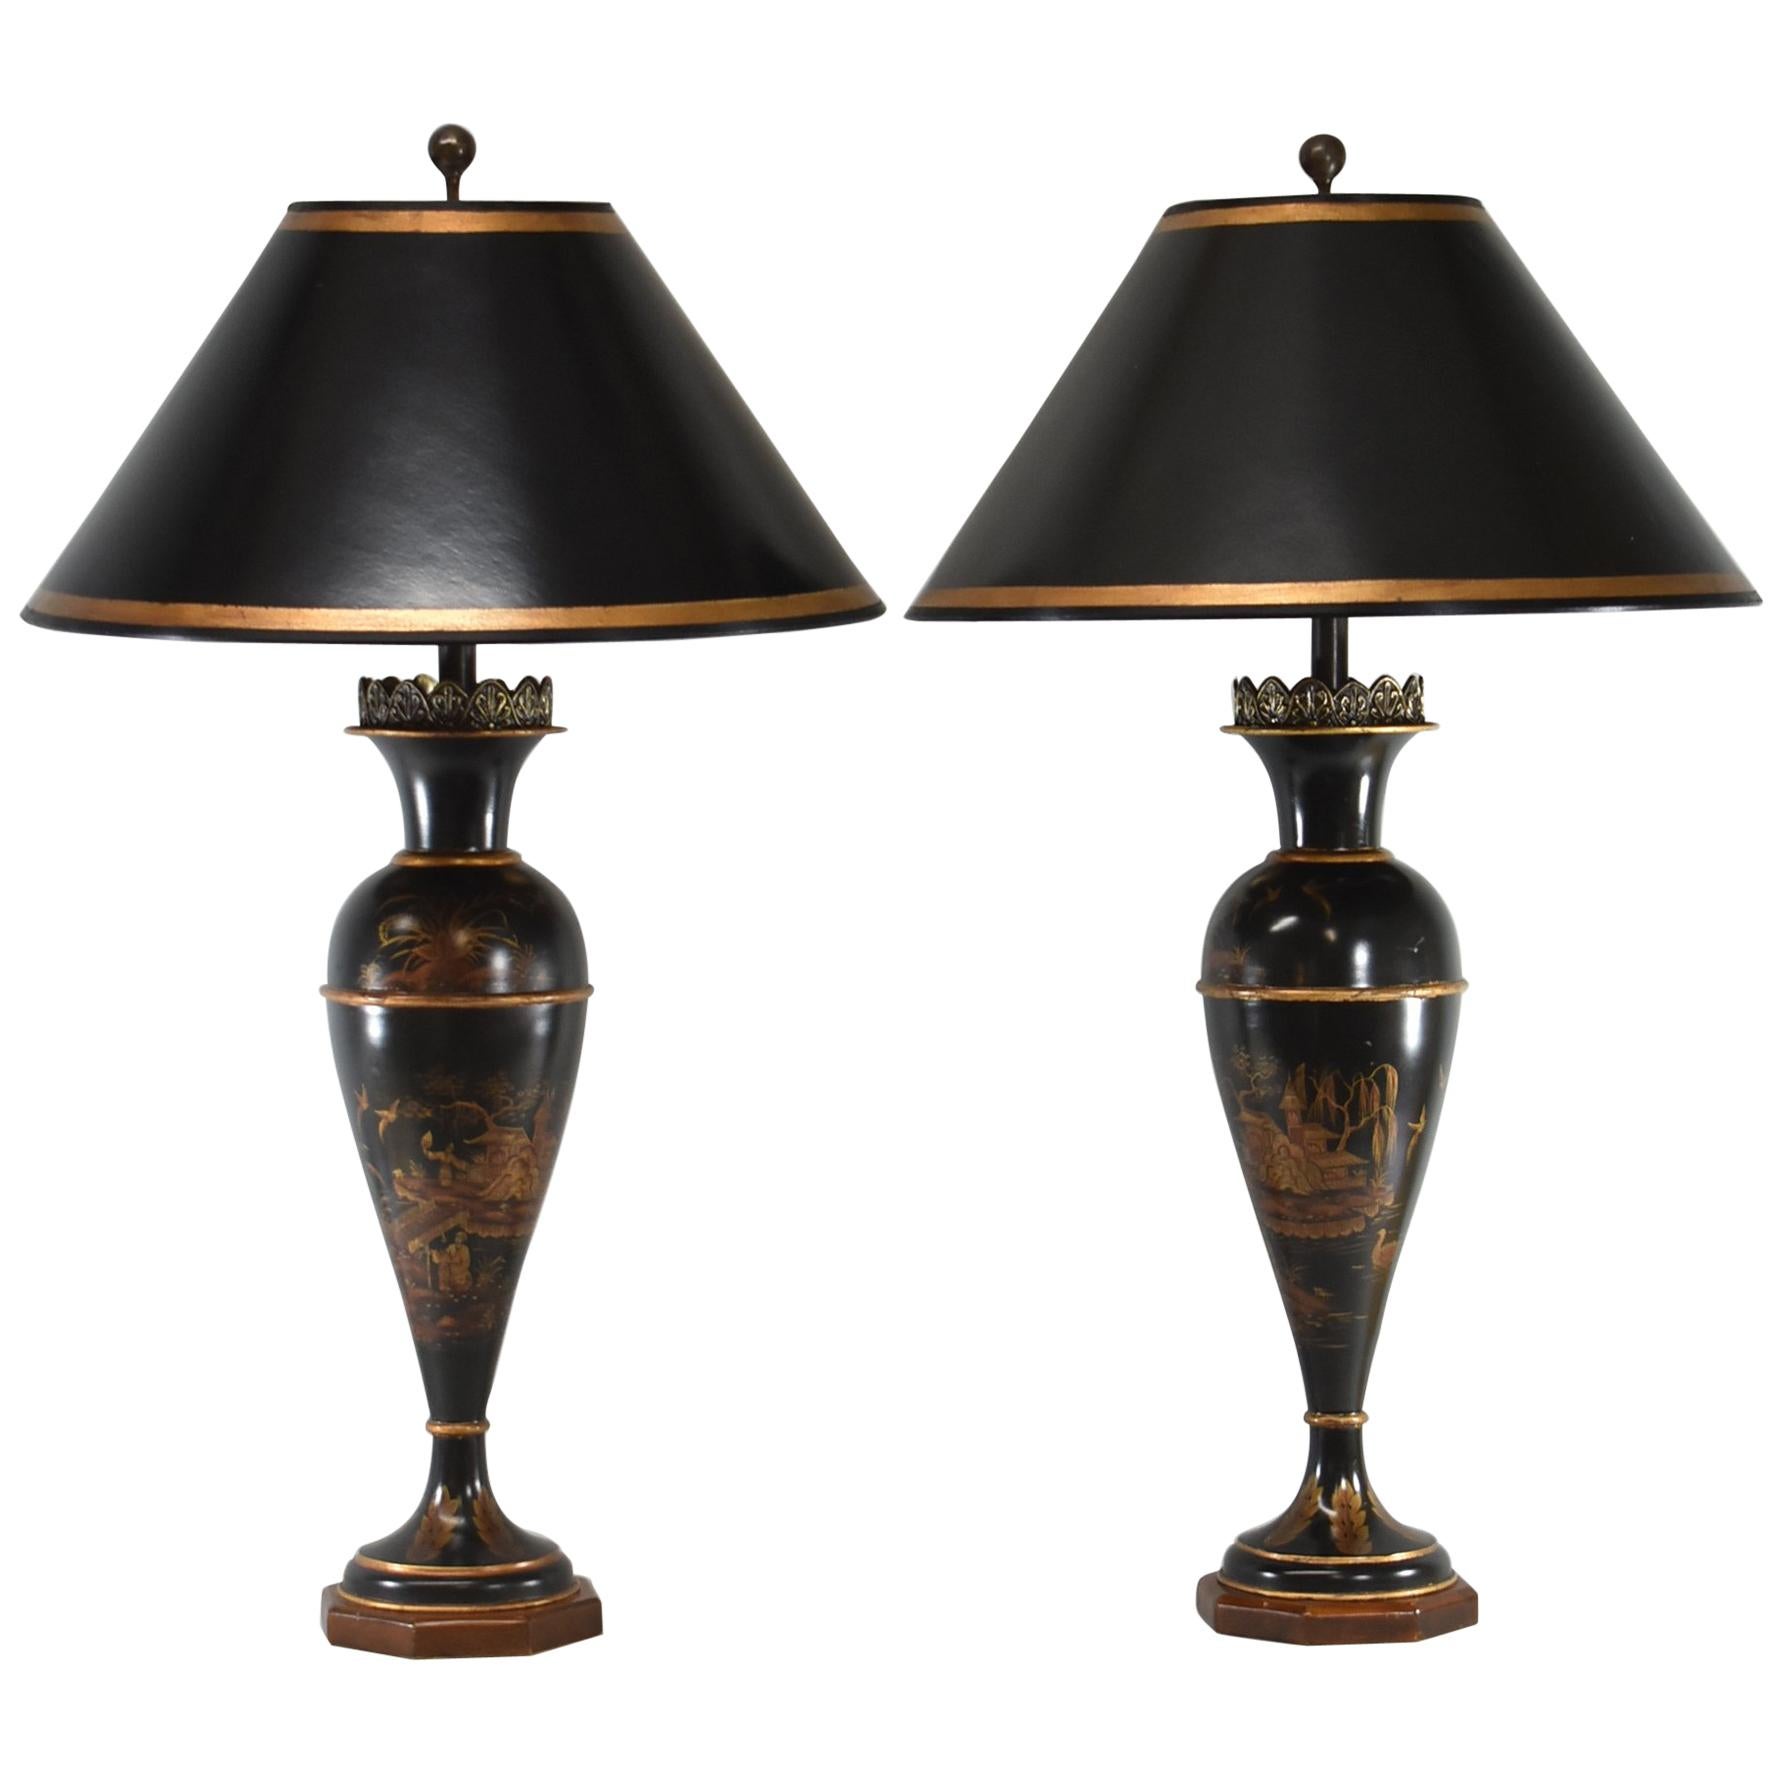 Pair of Black Tole Asian Style Table Lamps